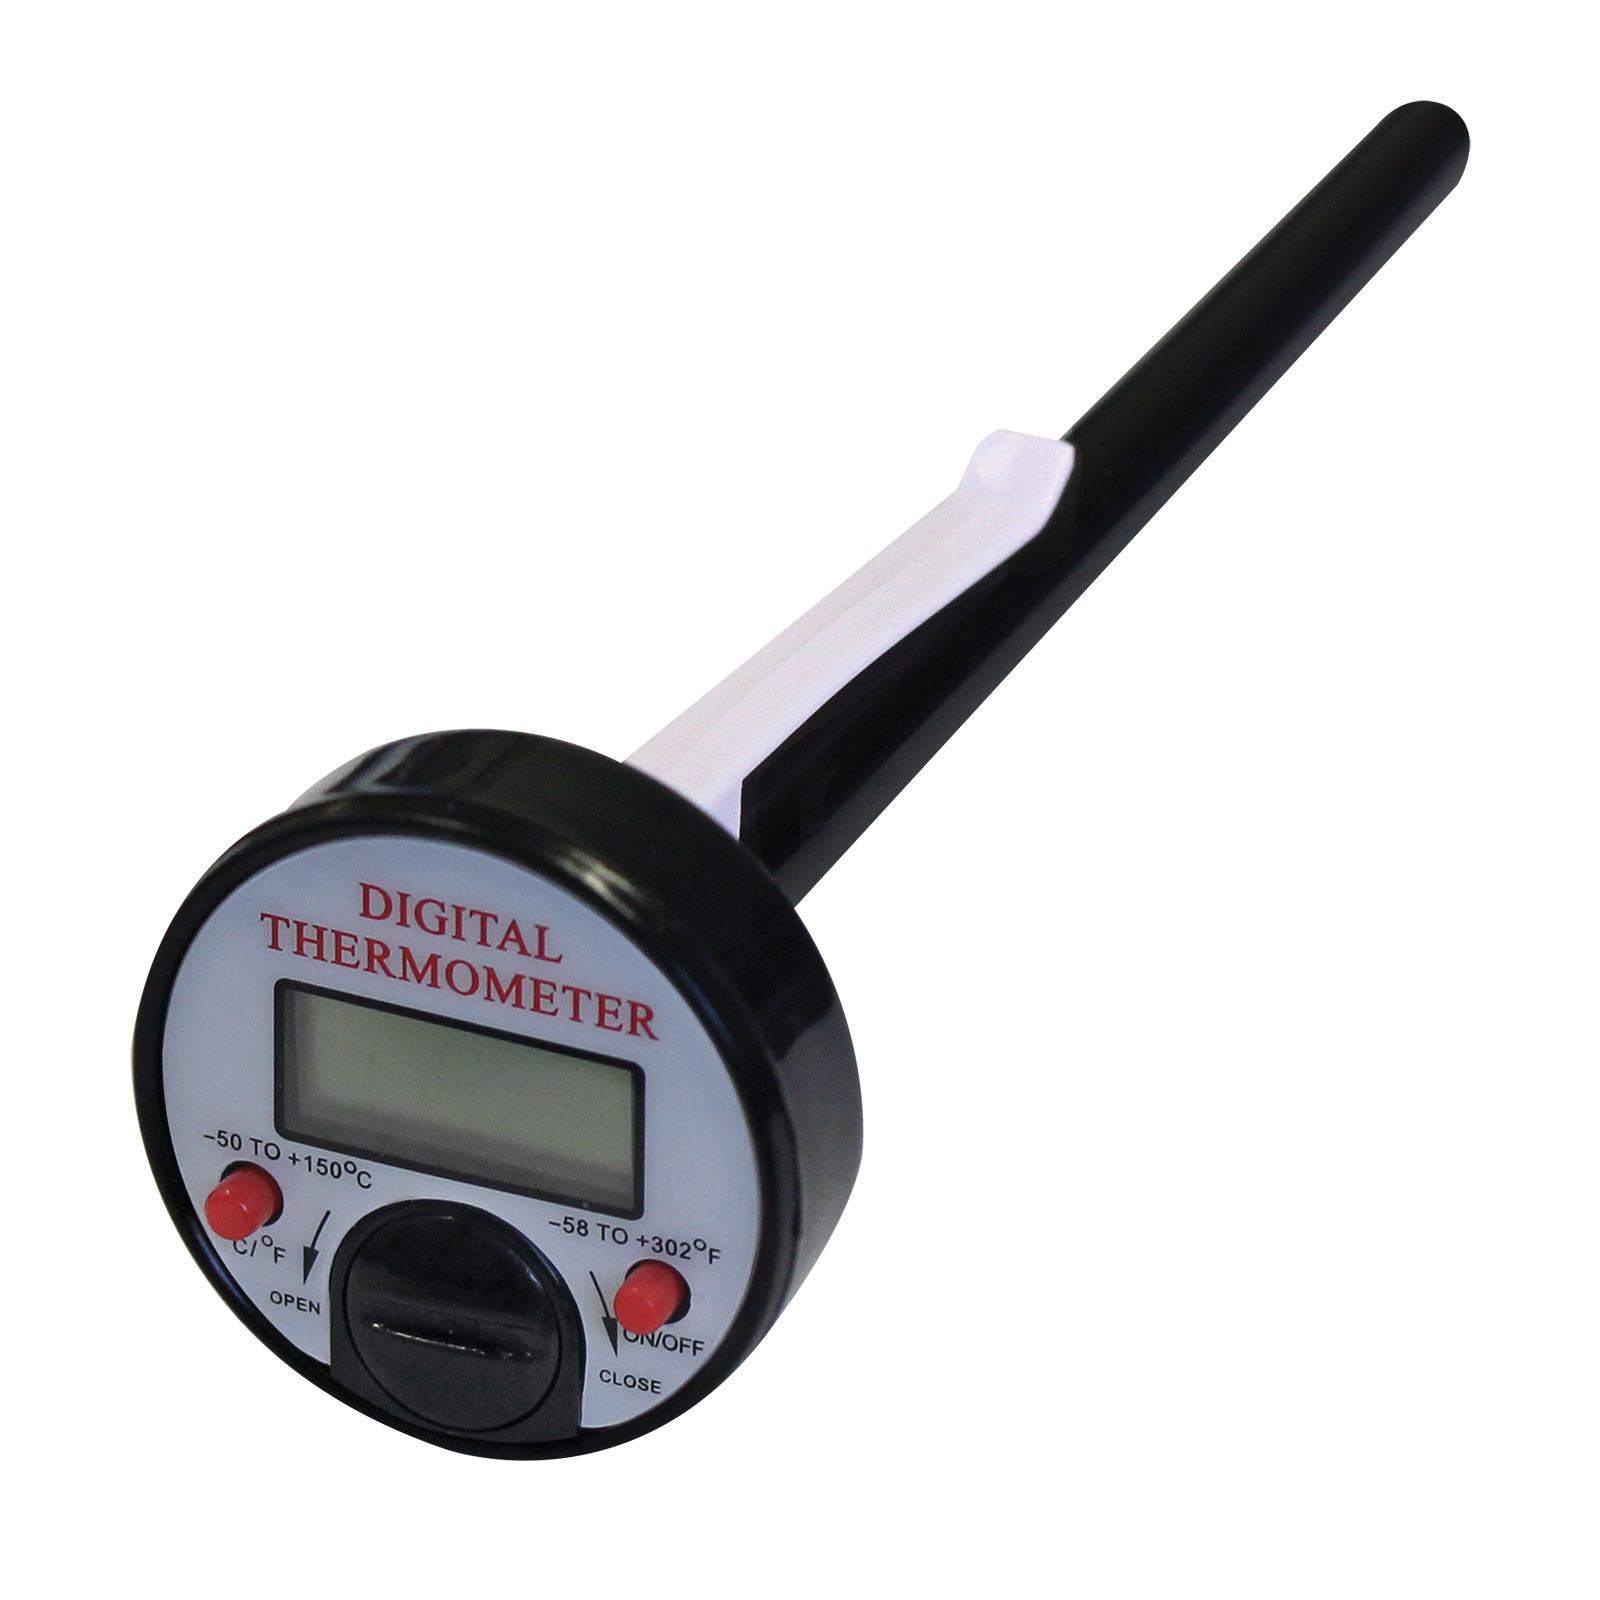 Electronic Digital Pocket Thermometer 3412 52223-A MT1413 59568 2795